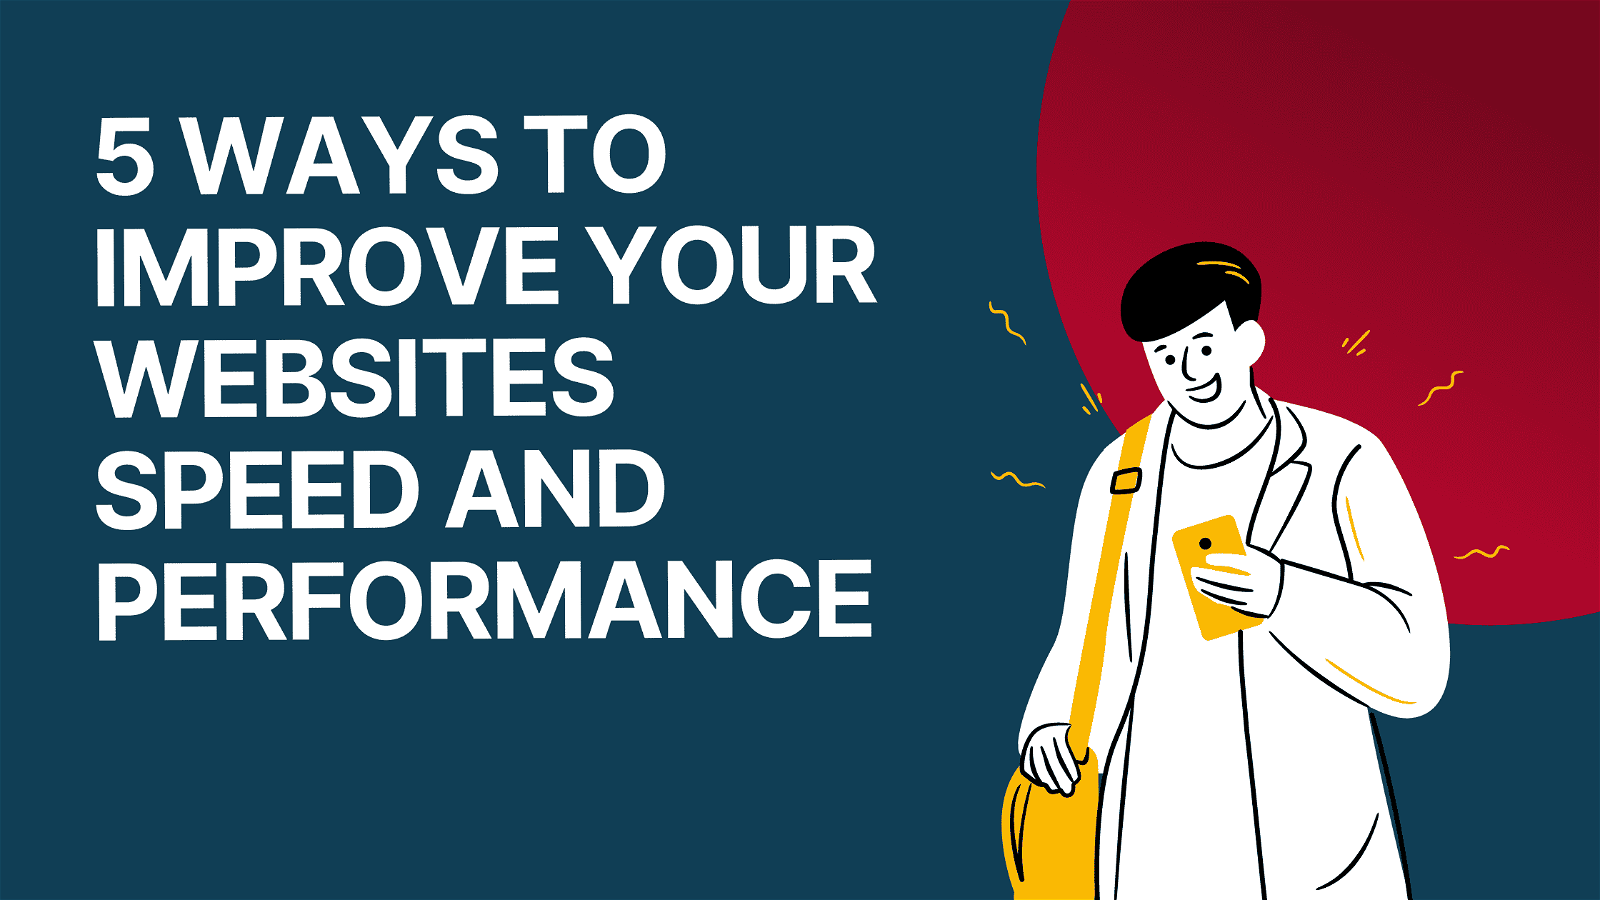 This image is providing five tips on how to improve the speed and performance of a website.